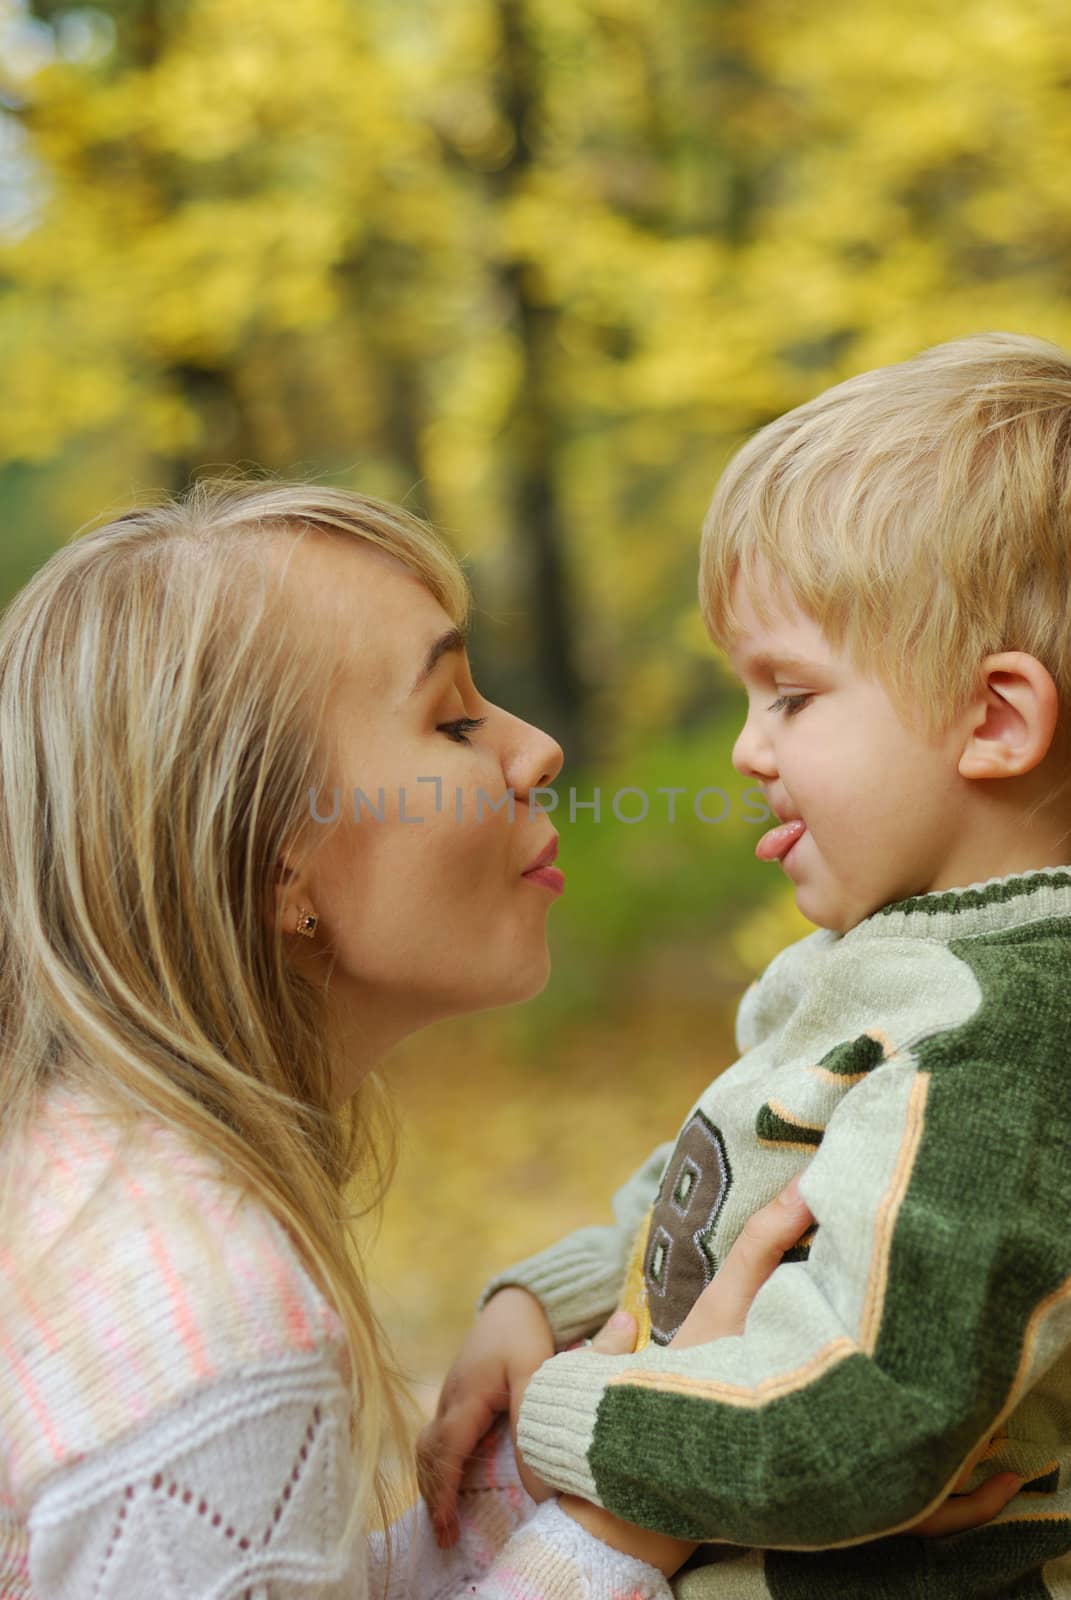 Mother with the child. On a background of yellow autumn foliage